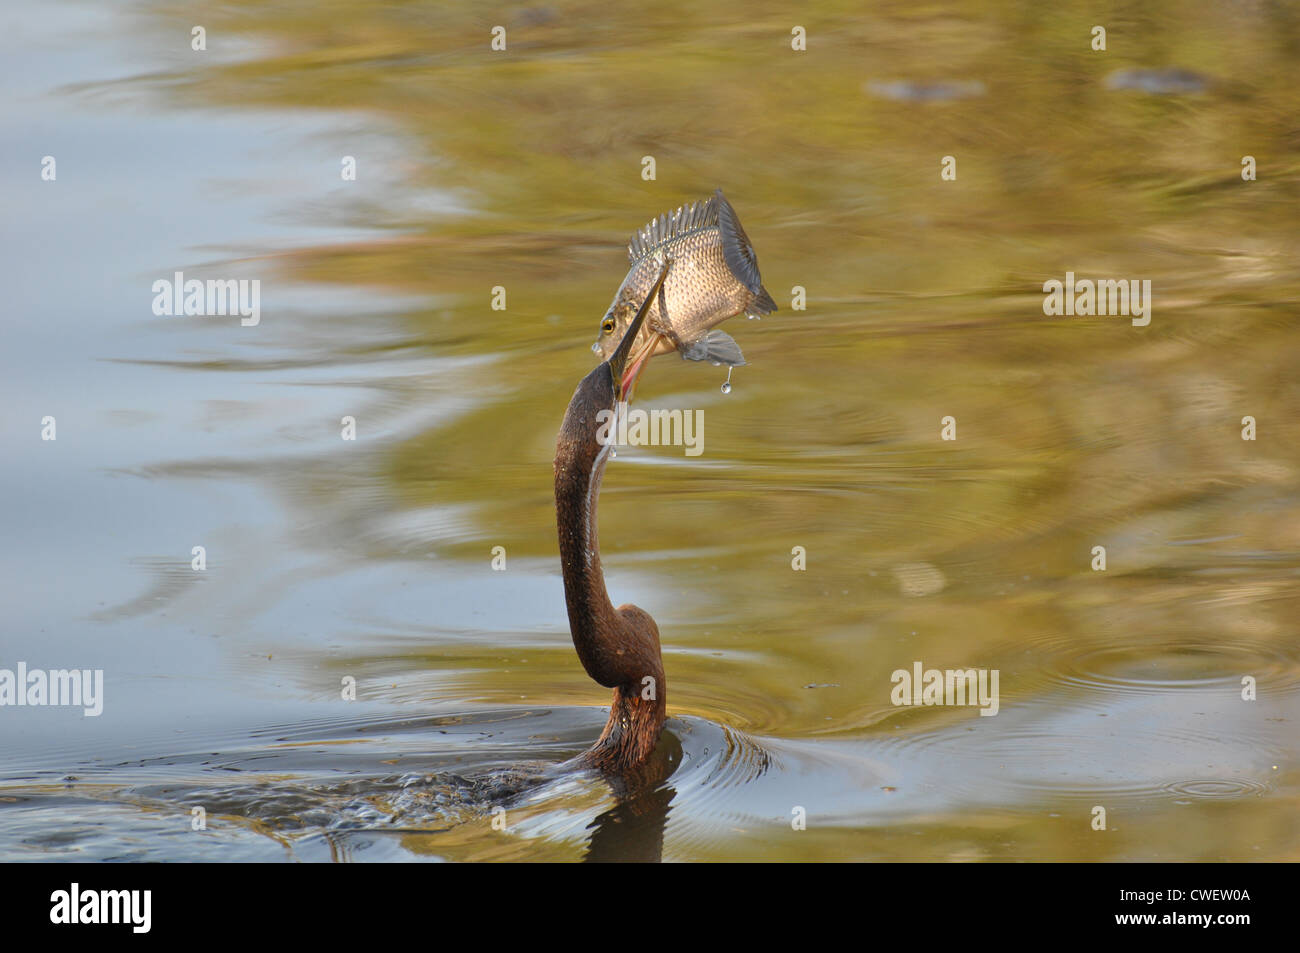 A fishing cormorant with a fish impaled on its beak. Stock Photo